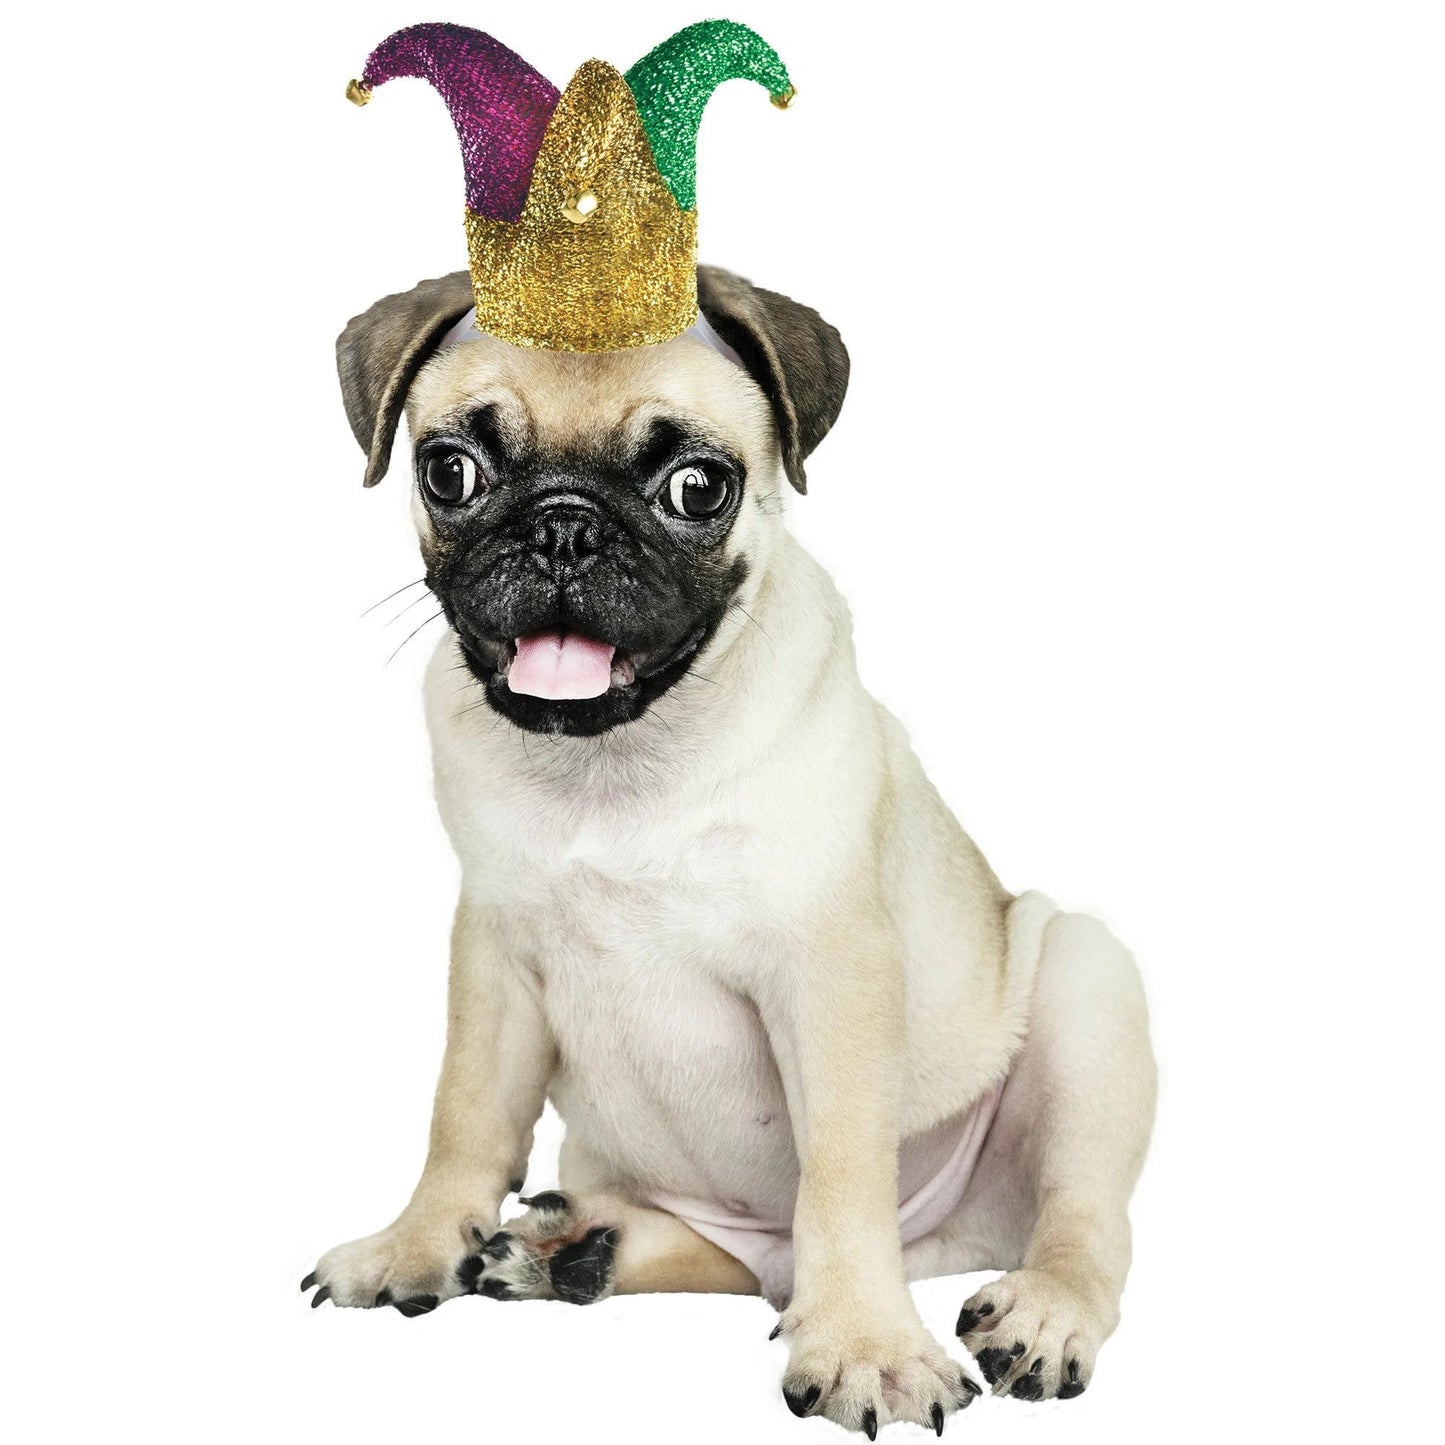 A Mardi Gras colored Jester hat for pets.